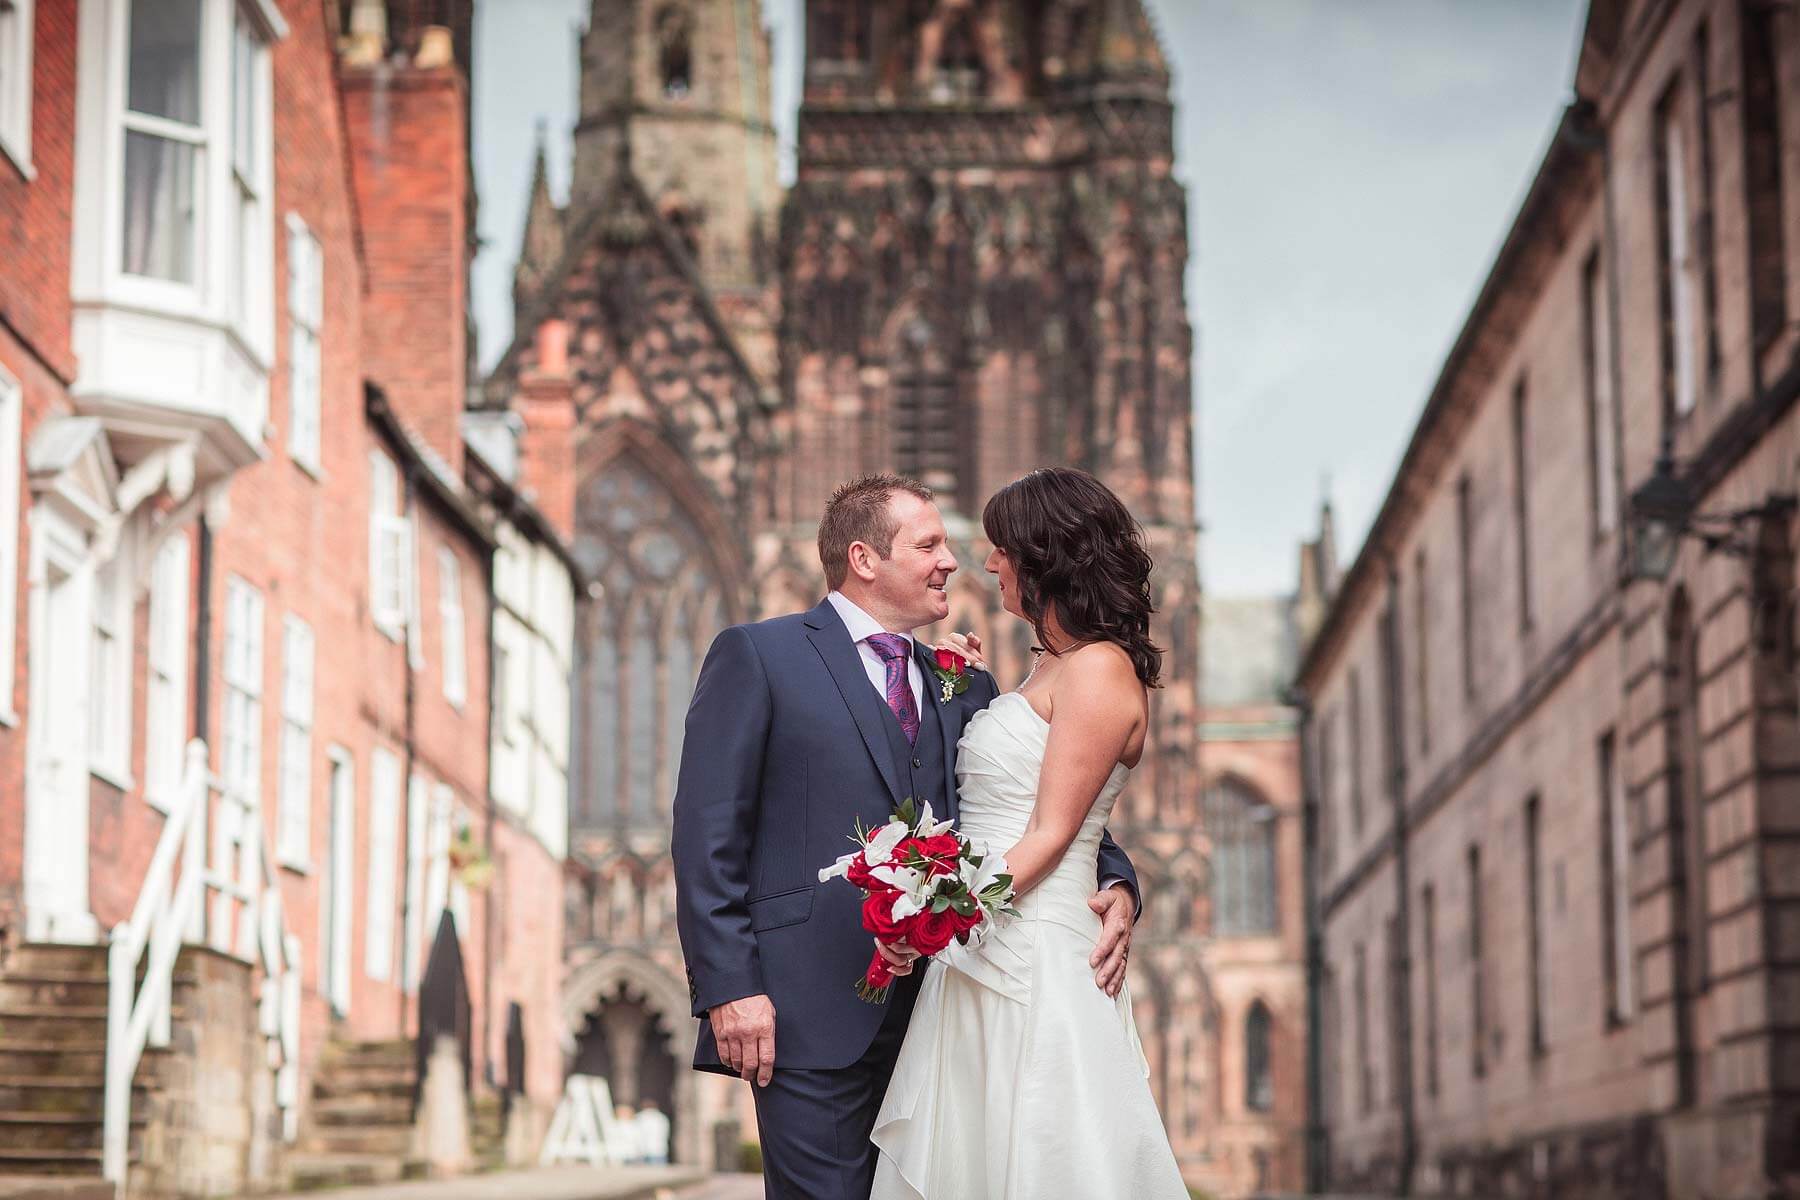 Beautiful relaxed wedding photographs in Lichfield City Centre in Staffordshire by Documentary Wedding Photographer Stuart James